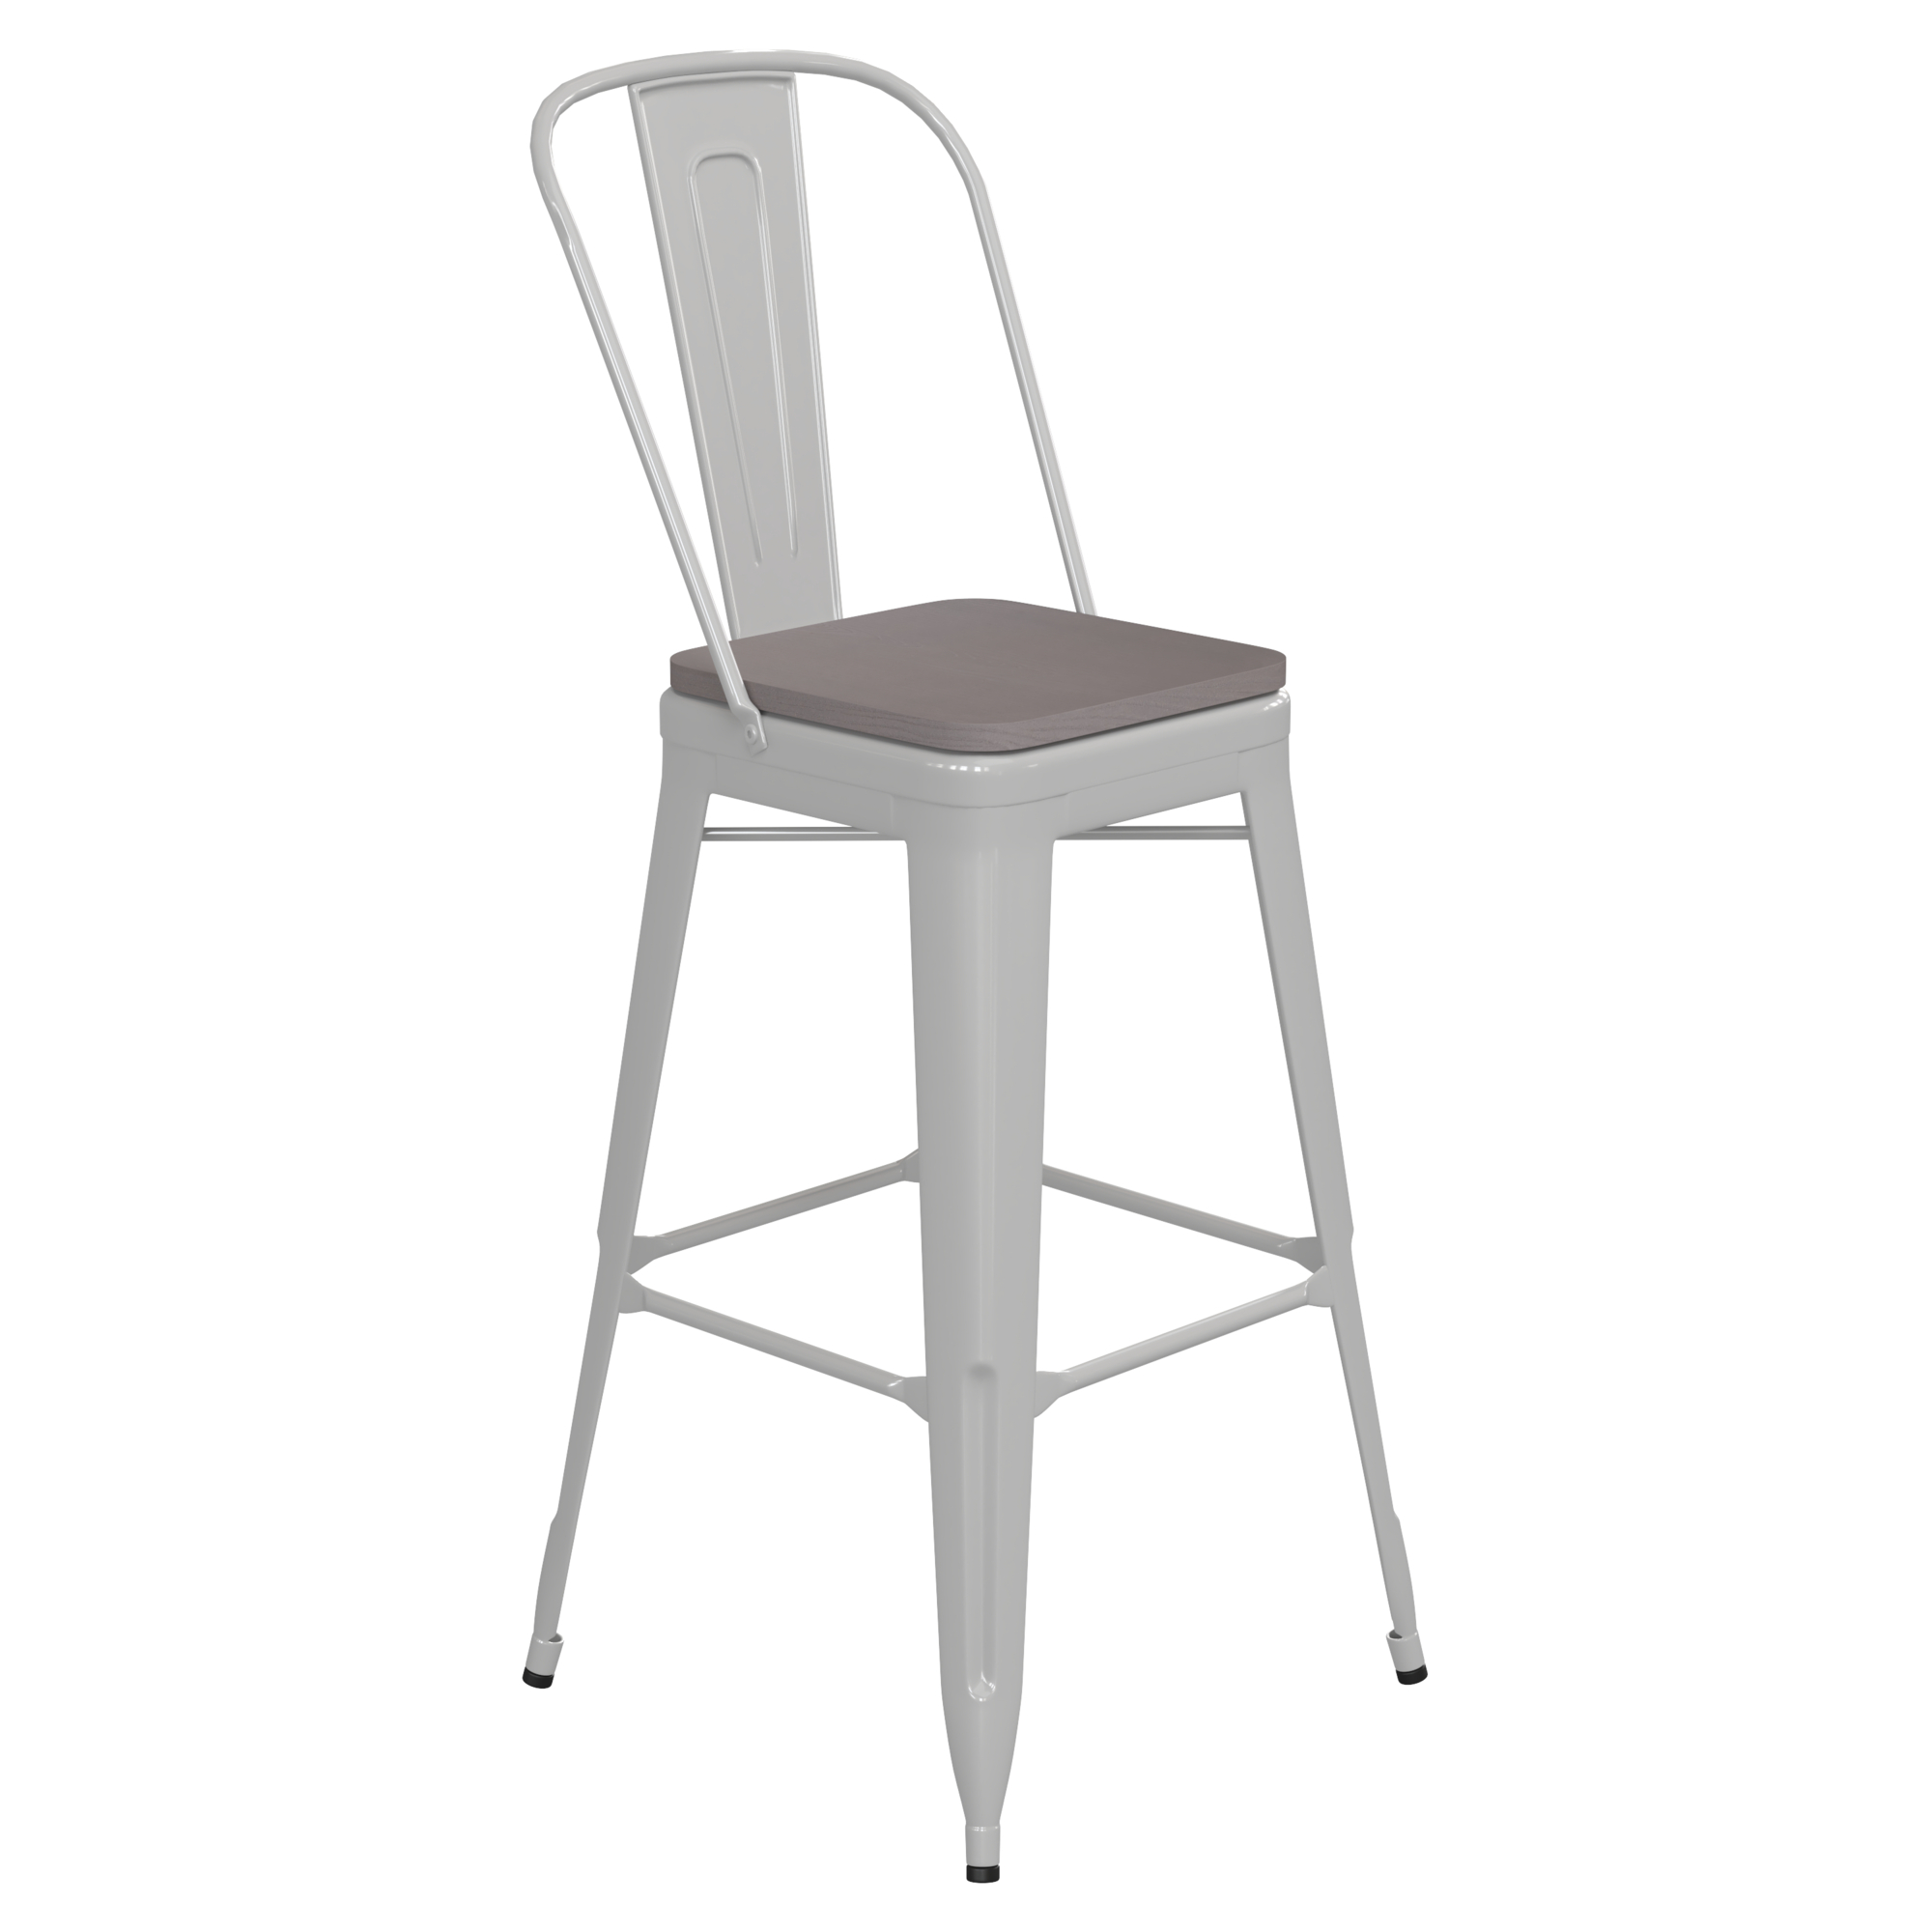 Flash Furniture, 30Inch White Metal Counter Stool-Gray Poly Seat, Primary Color White, Included (qty.) 1, Model CH3132030GBWP2G